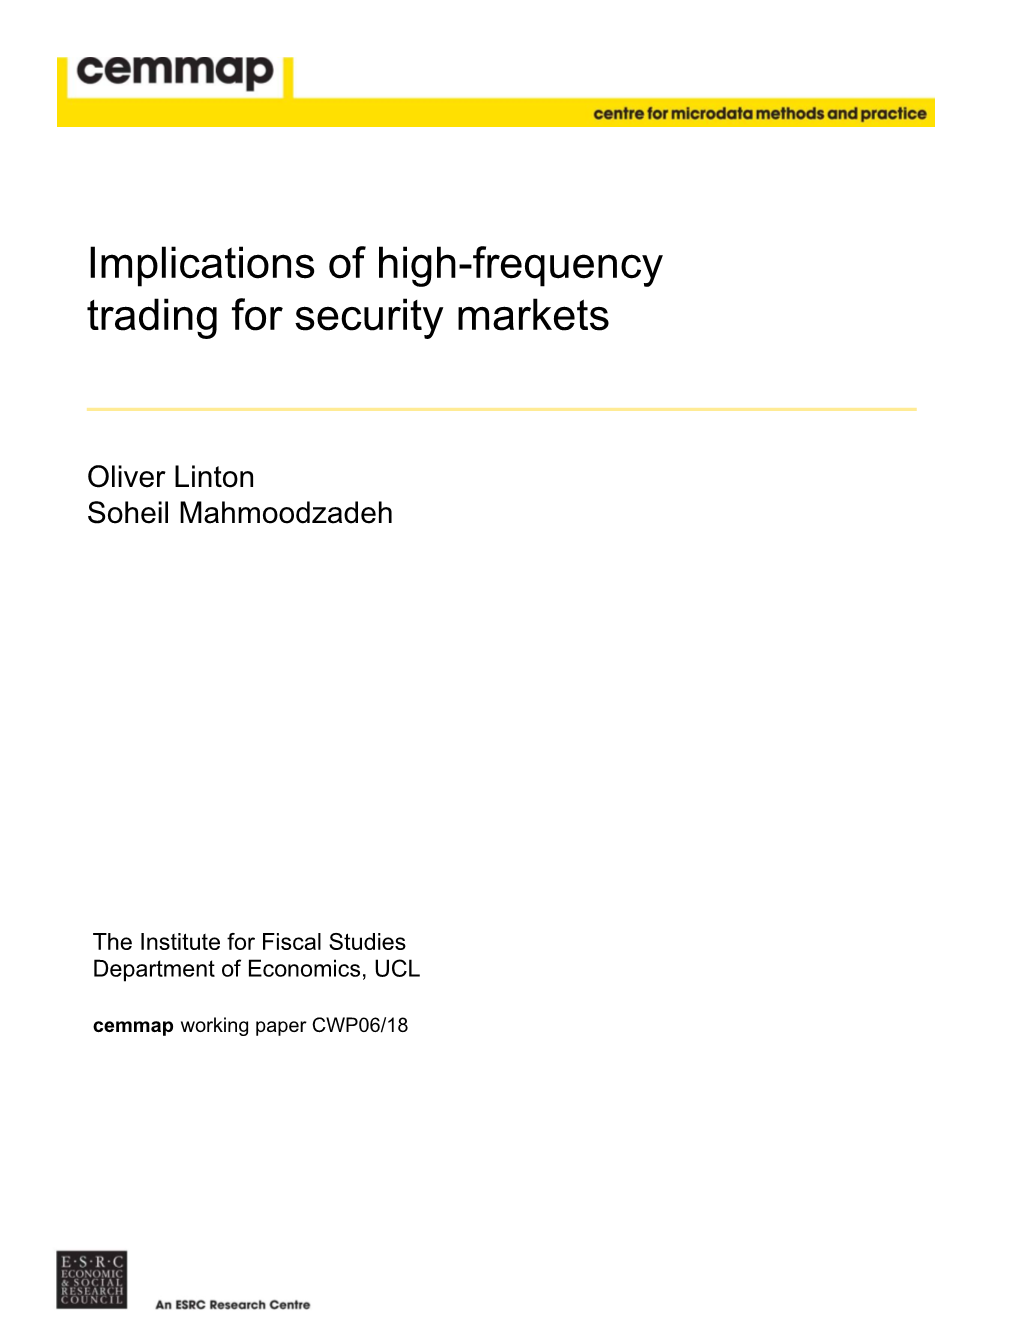 Implications of High-Frequency Trading for Security Markets